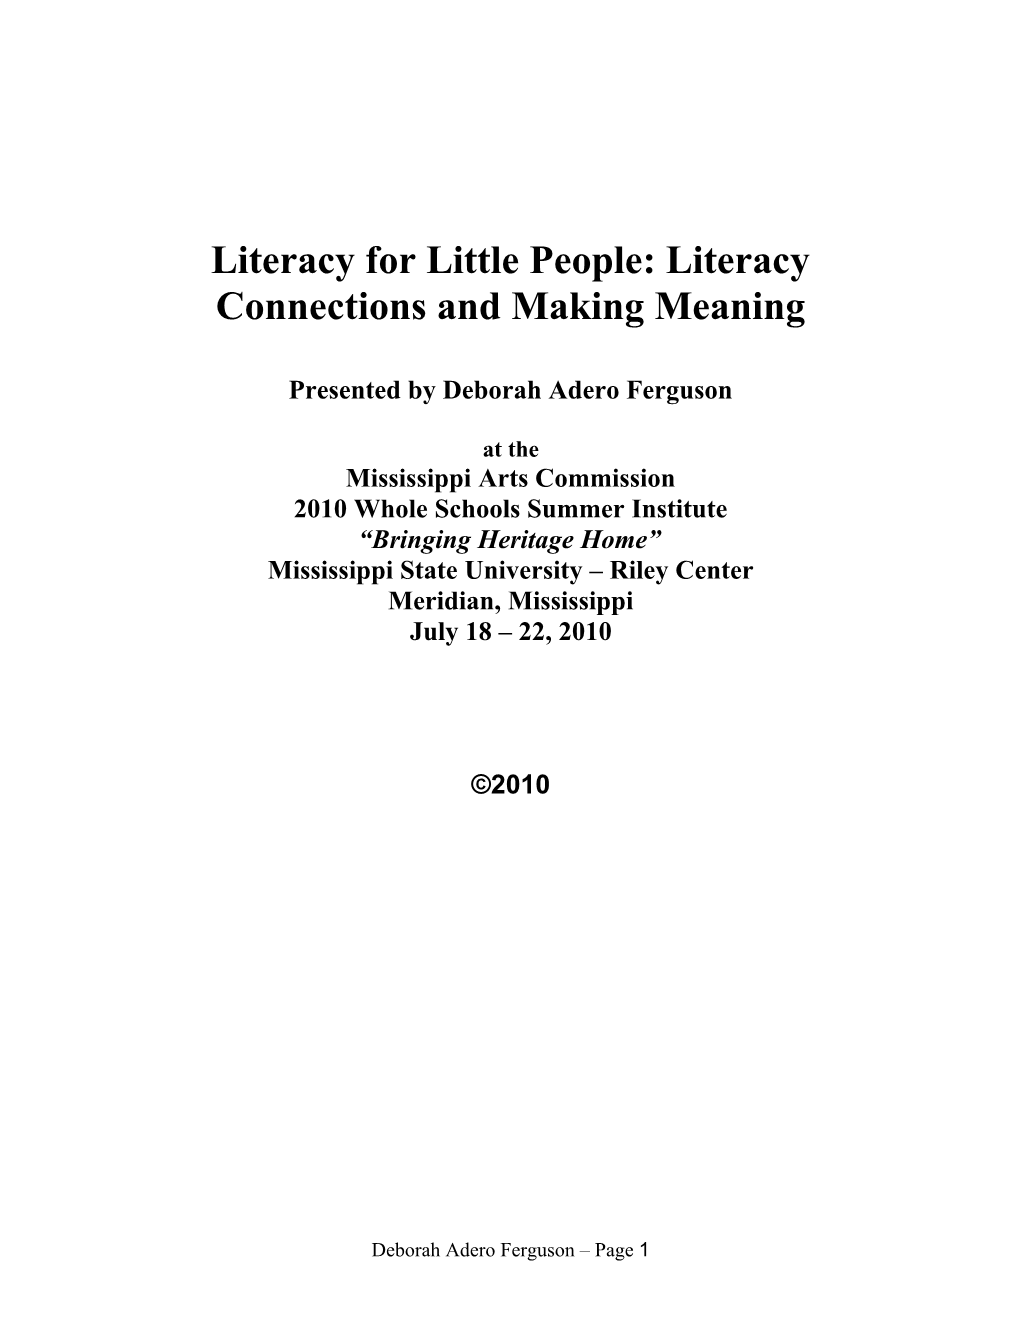 Literacy for Little People: Literacy Connections and Making Meaning